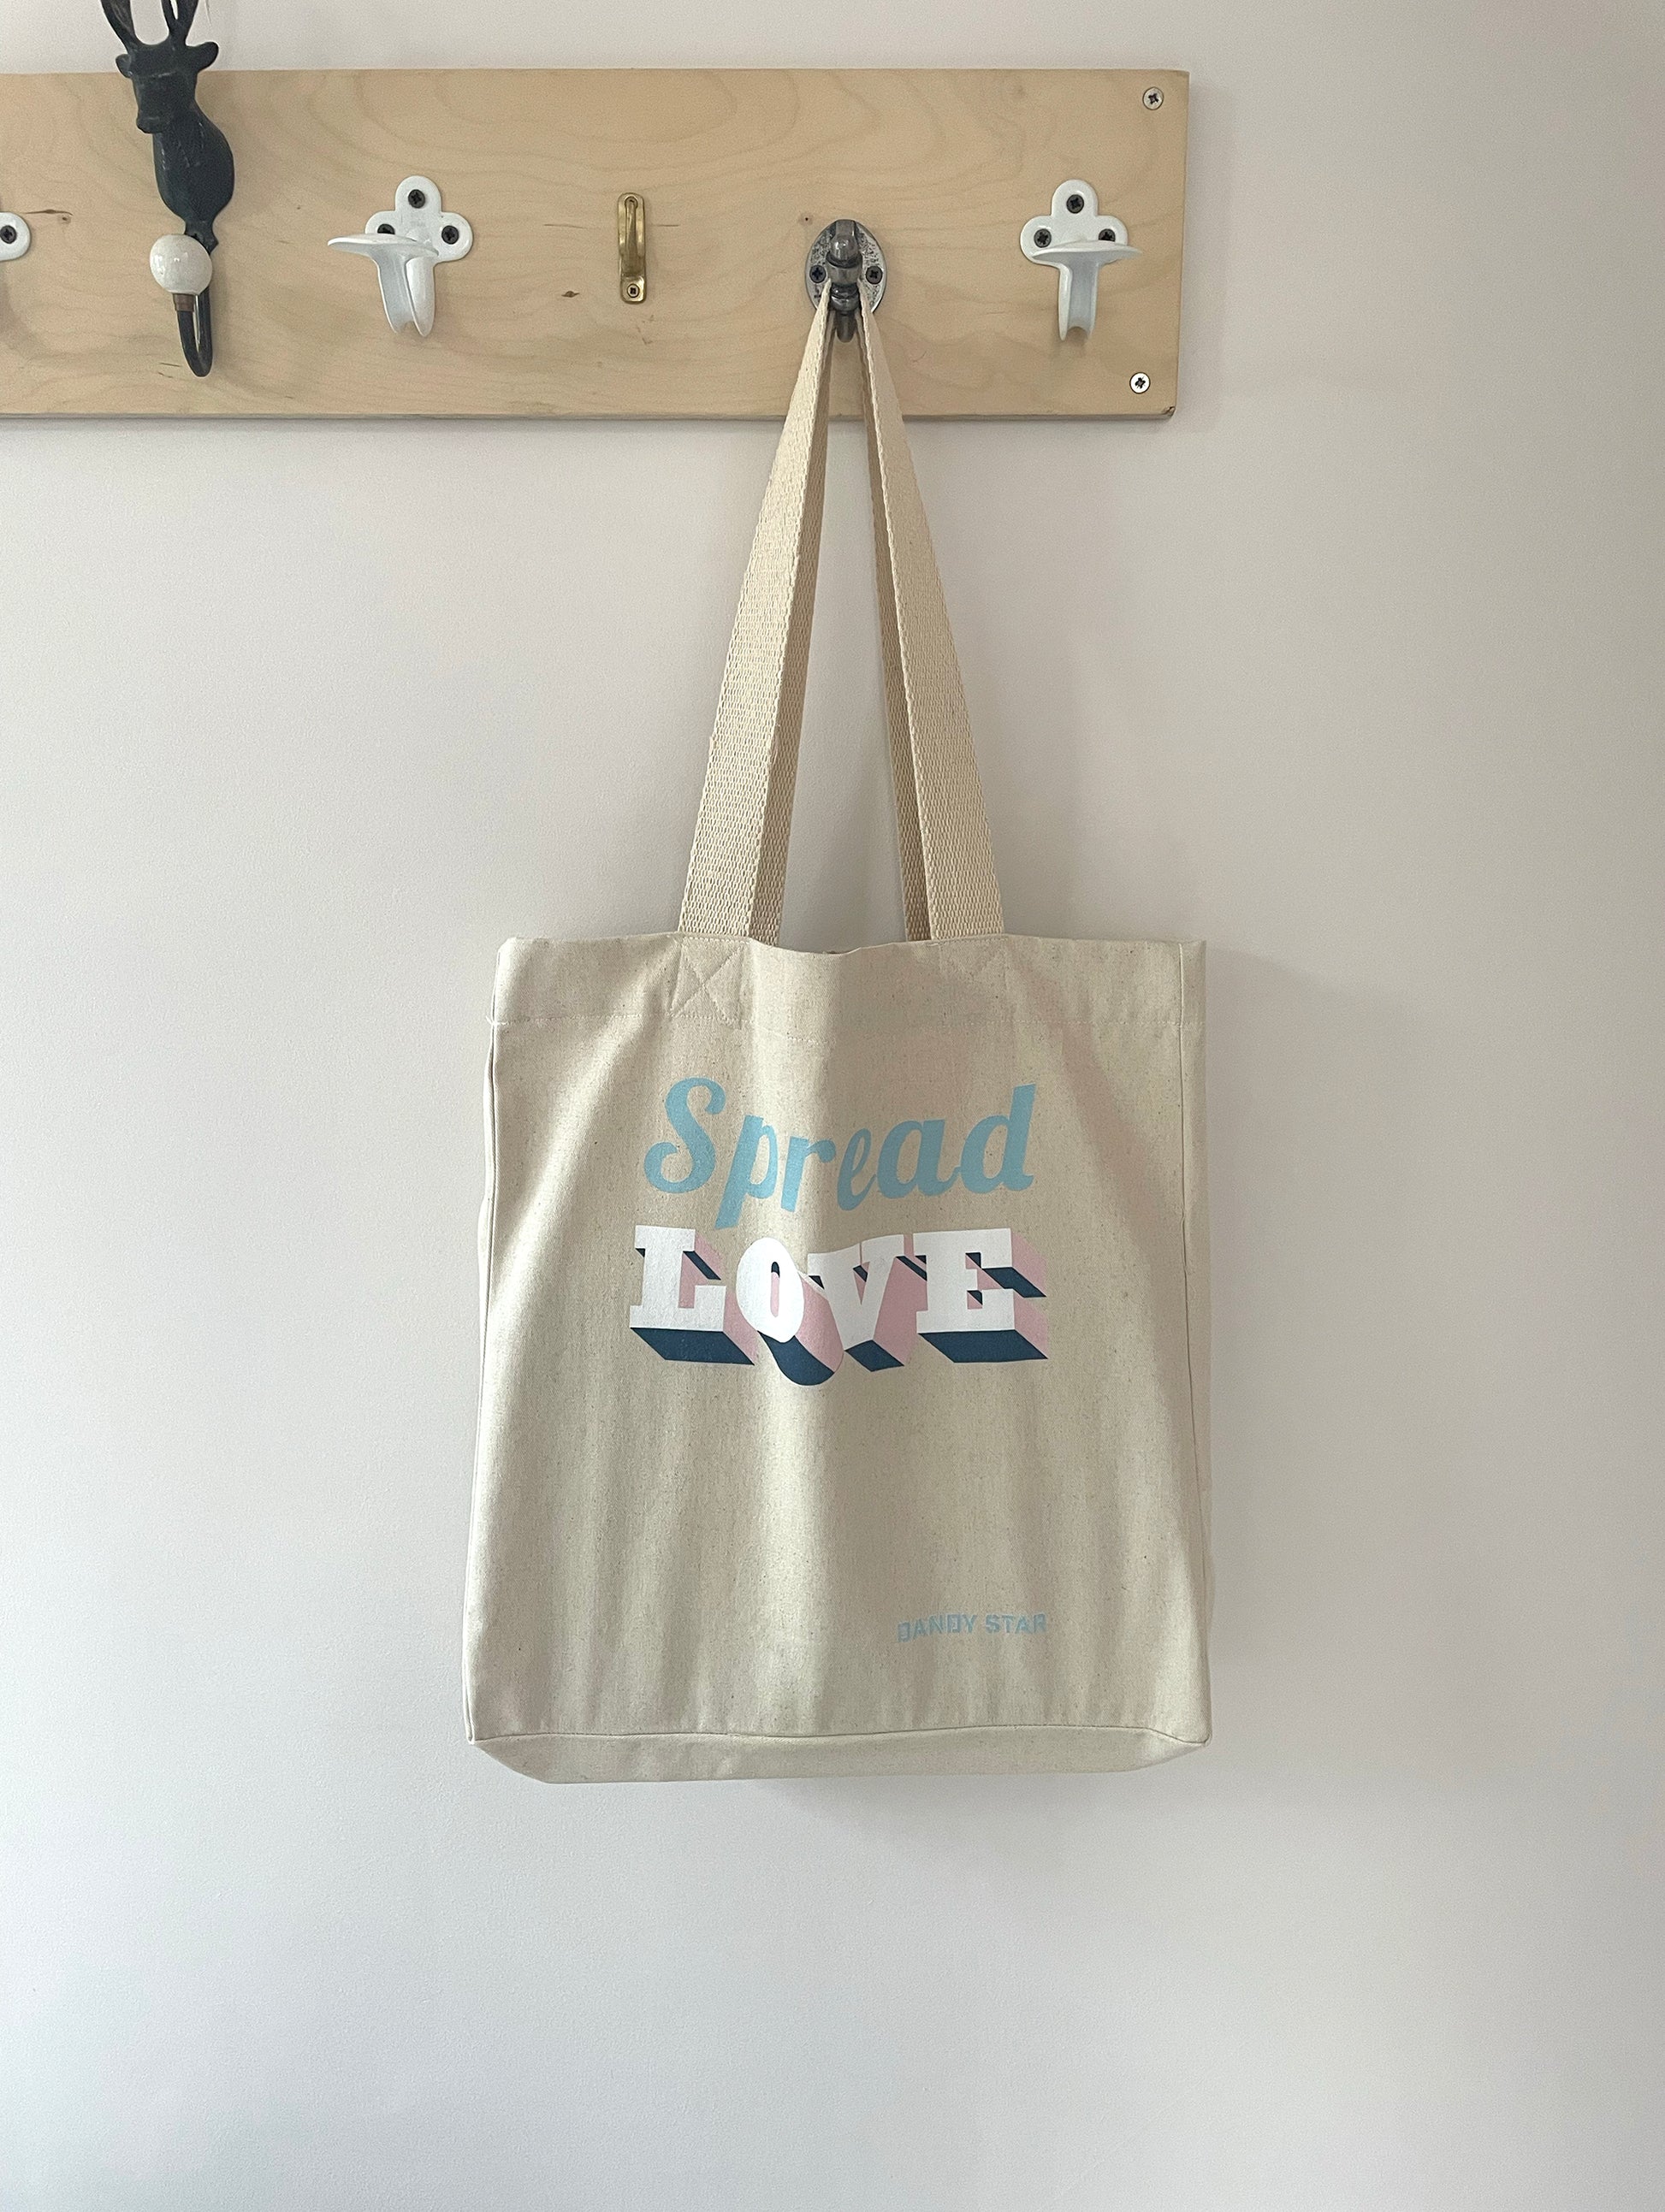 Spread Love tote hanging